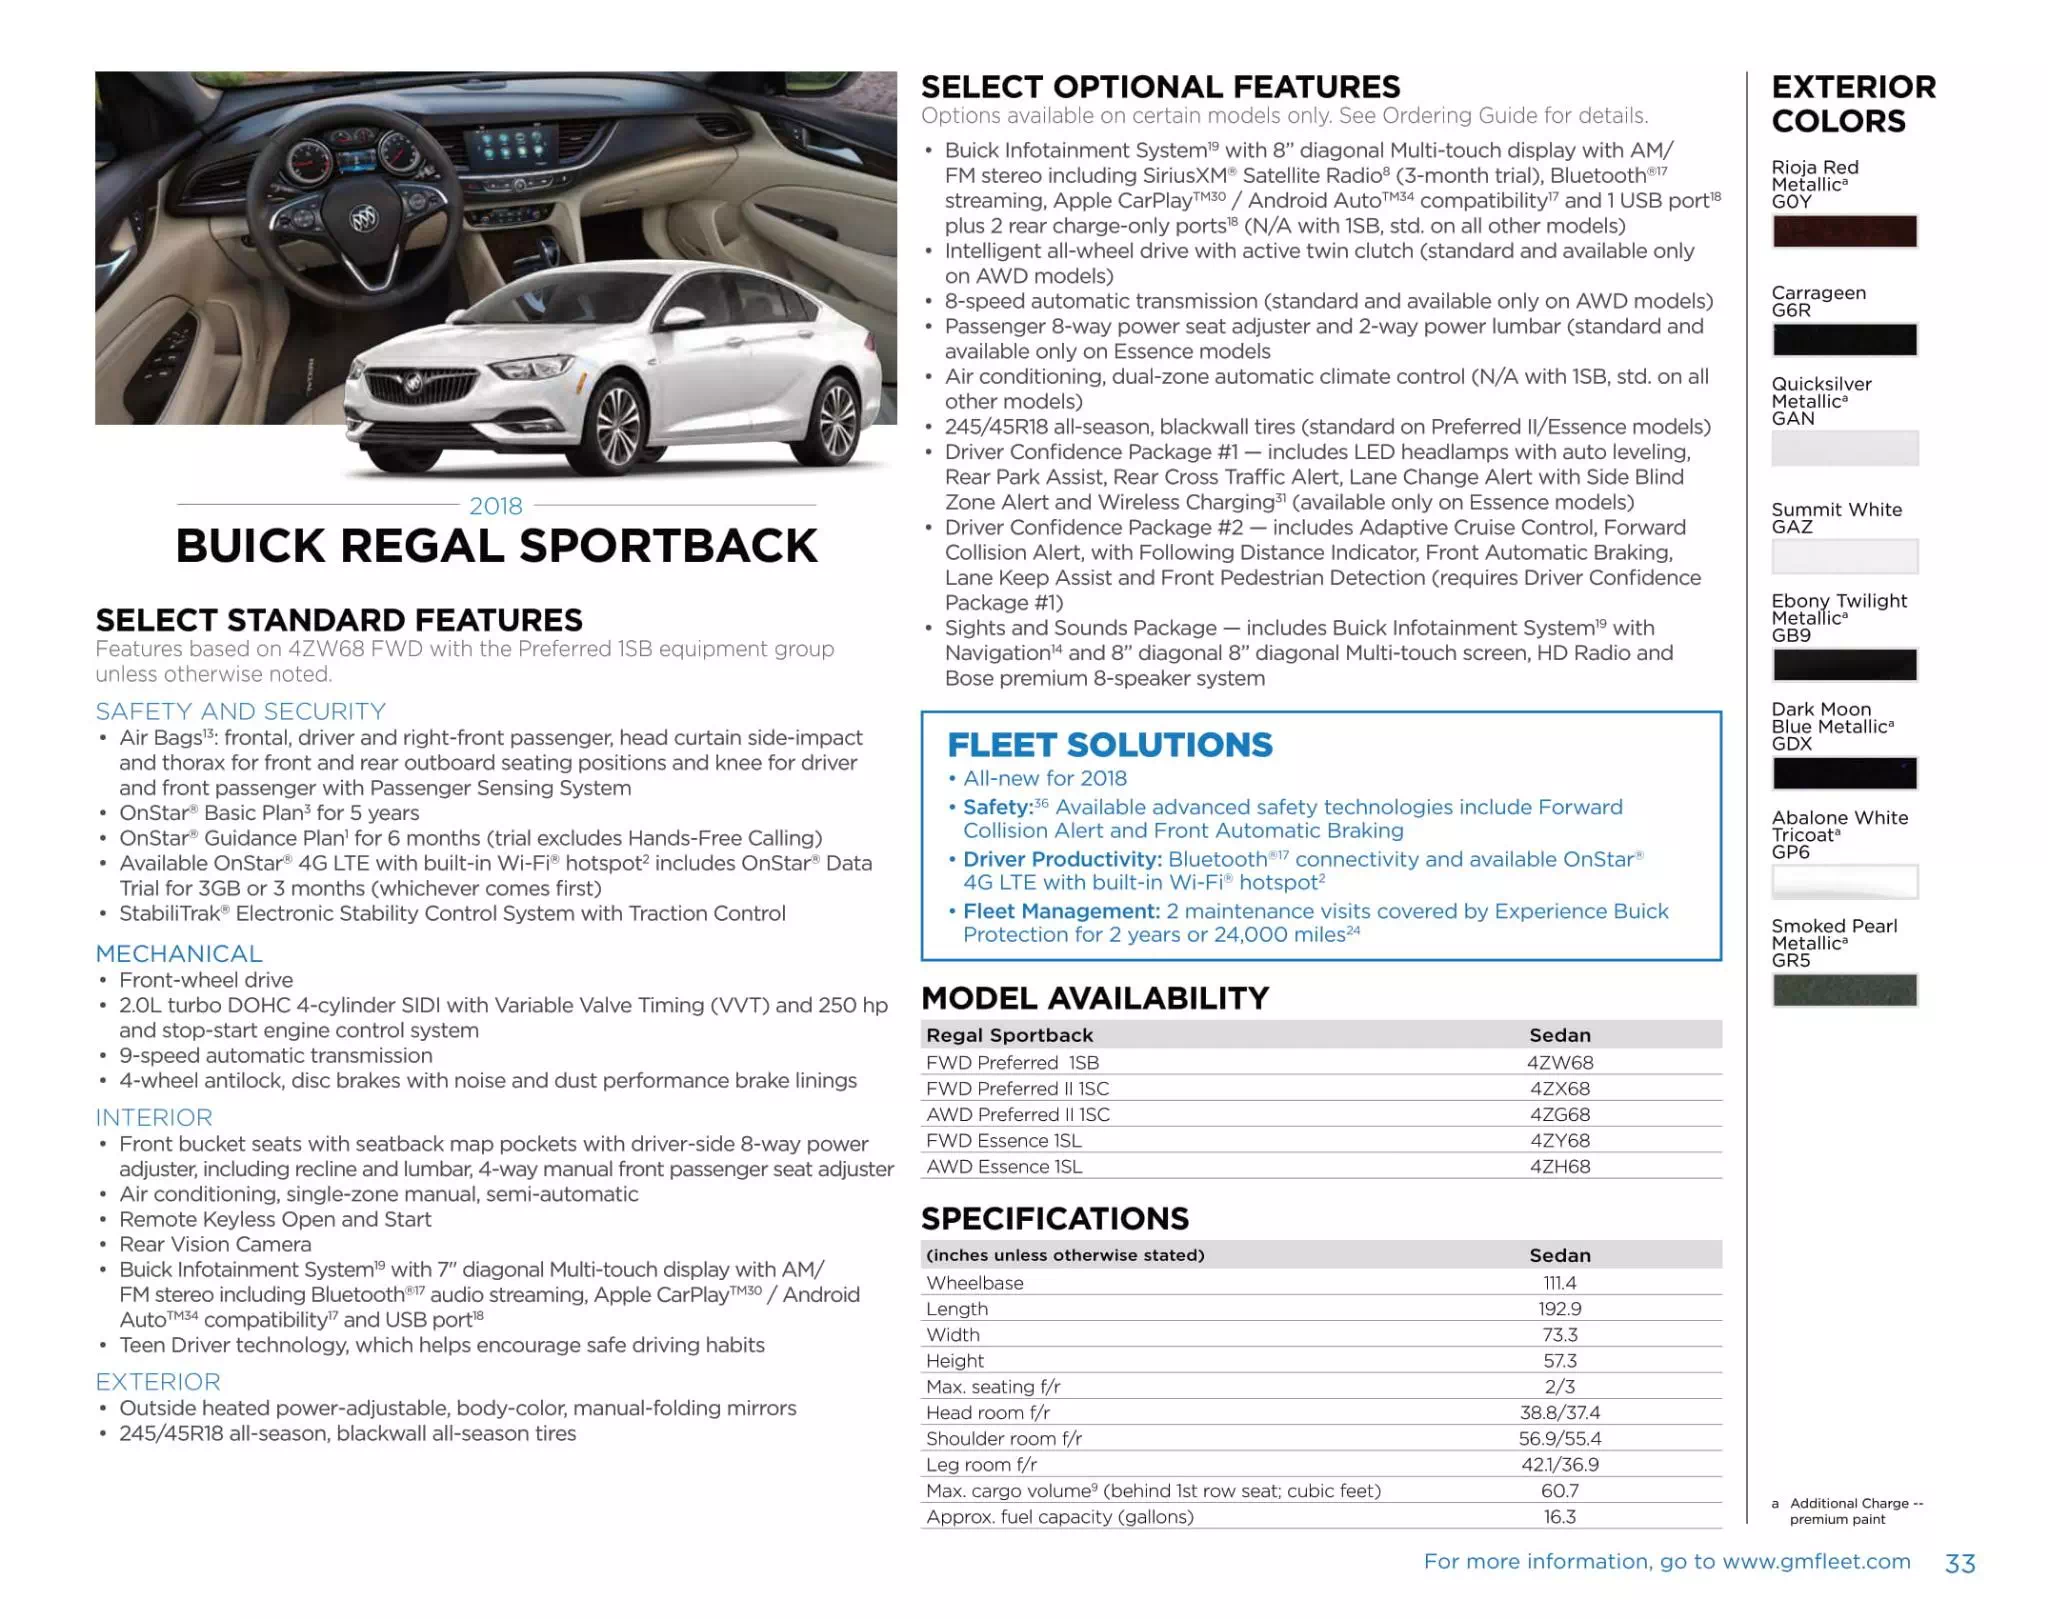 General Motors Sell sheet for Buick Regal Models, and Color Codes in 2018